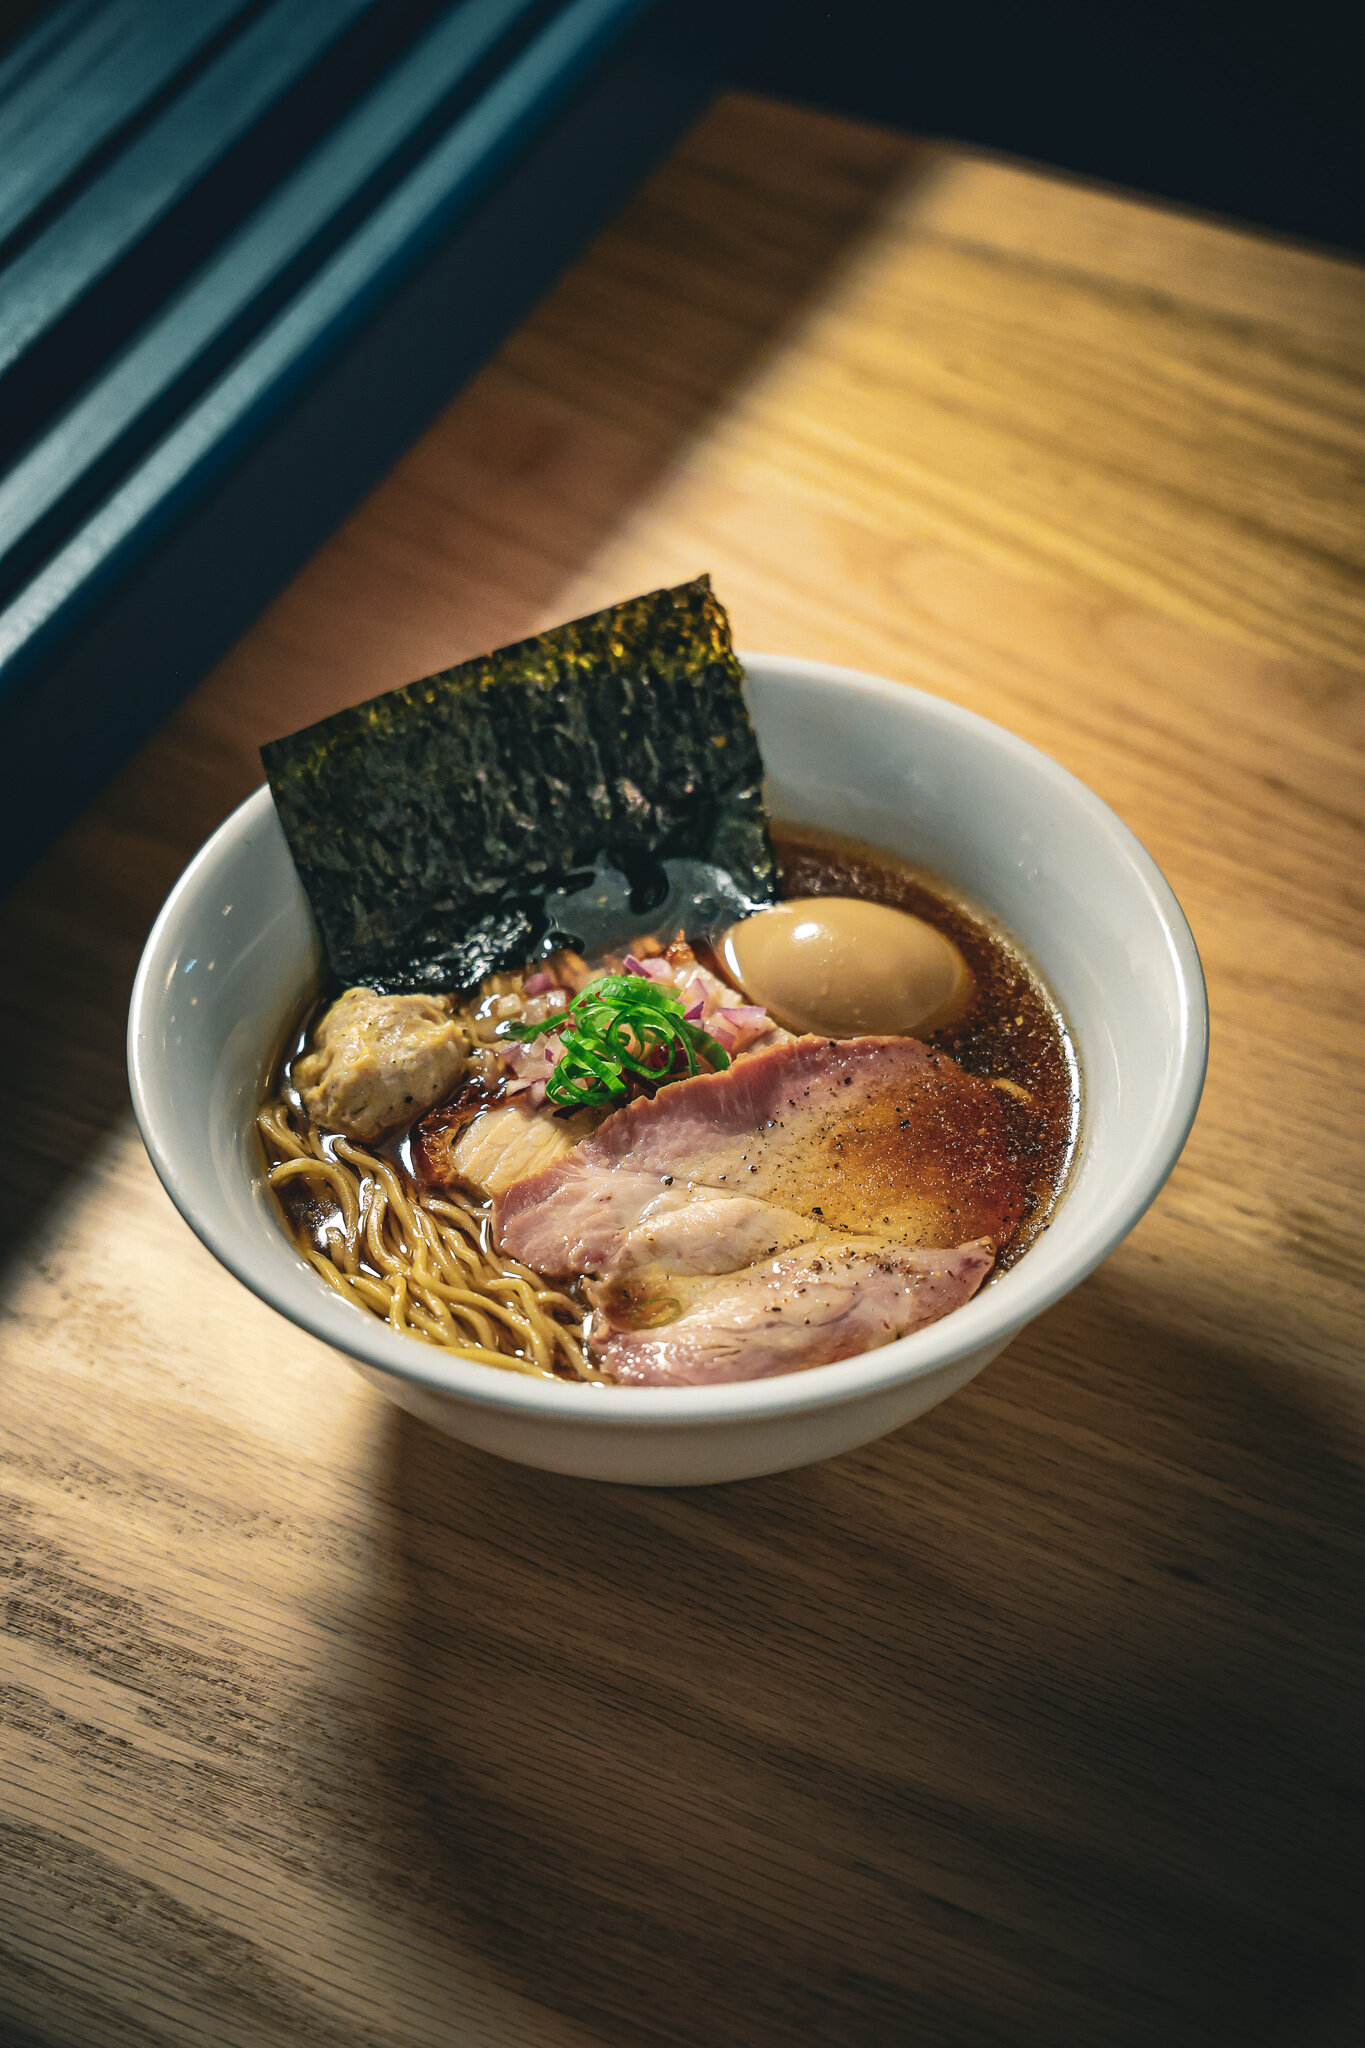 SHOYU SPECIAL 
Chicken Broth, Shoyu Tare, Pork Belly, Smoked Collar, House Noodles, Ajitama, Chicken Breast &amp; Chicken Meatball 

Who&rsquo;s had this bowl at 16 Tib Lane? 

Available 
Tue- Friday 
Lunch 12-3
Dinner 5-11
Saturday 12-12